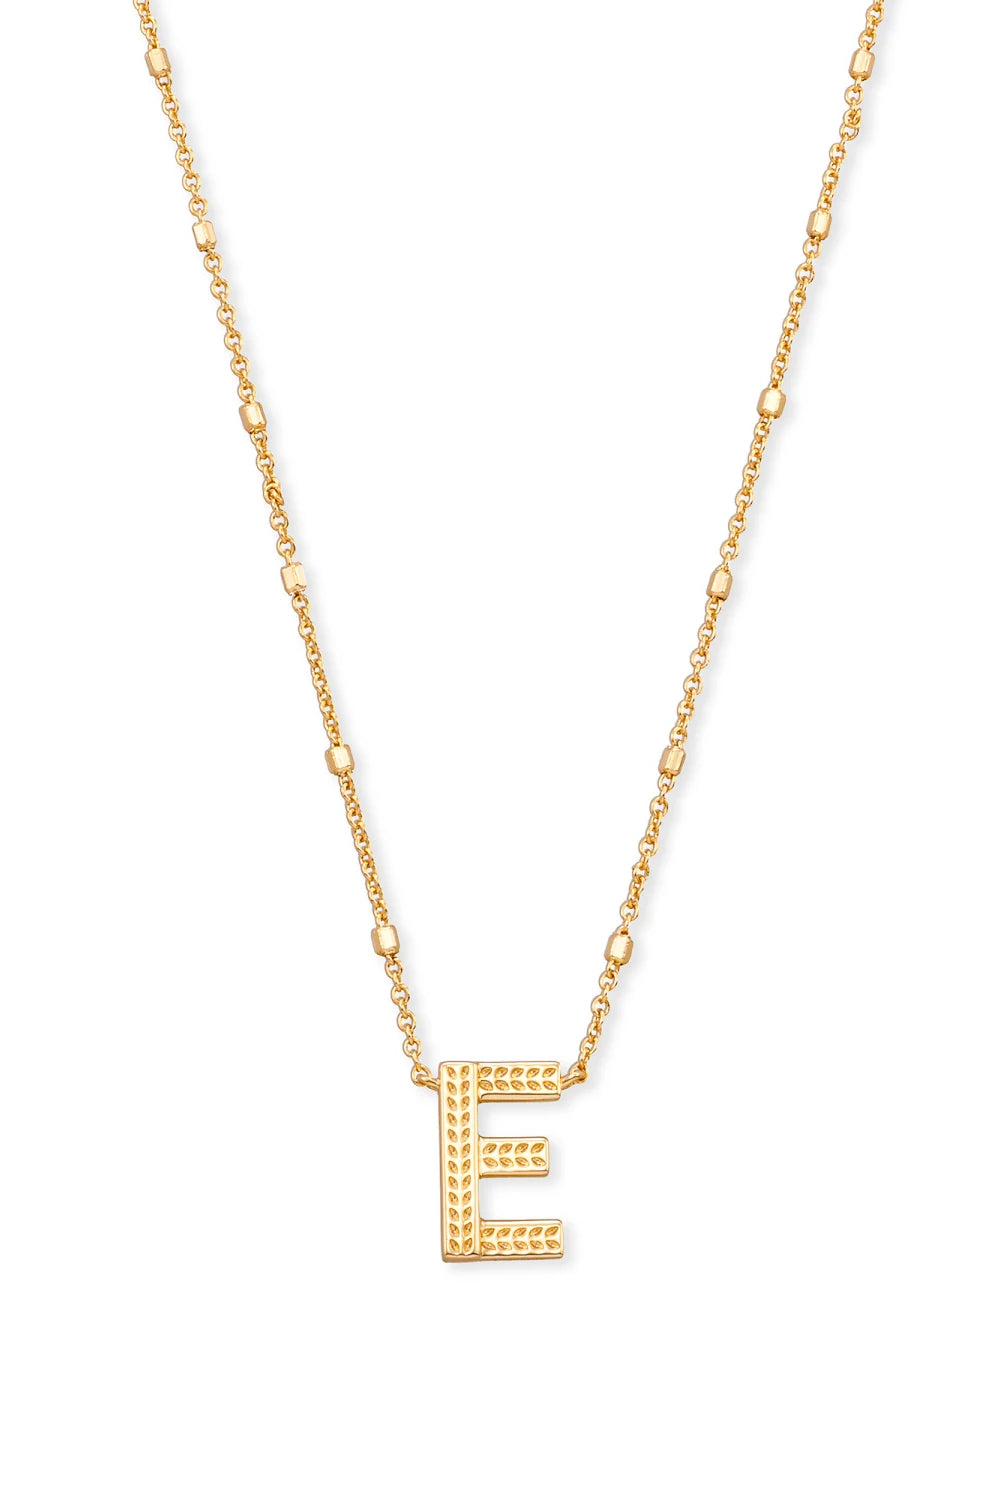 Monogram 'M' Silver Necklace by Kendra Scott - Her Hide Out